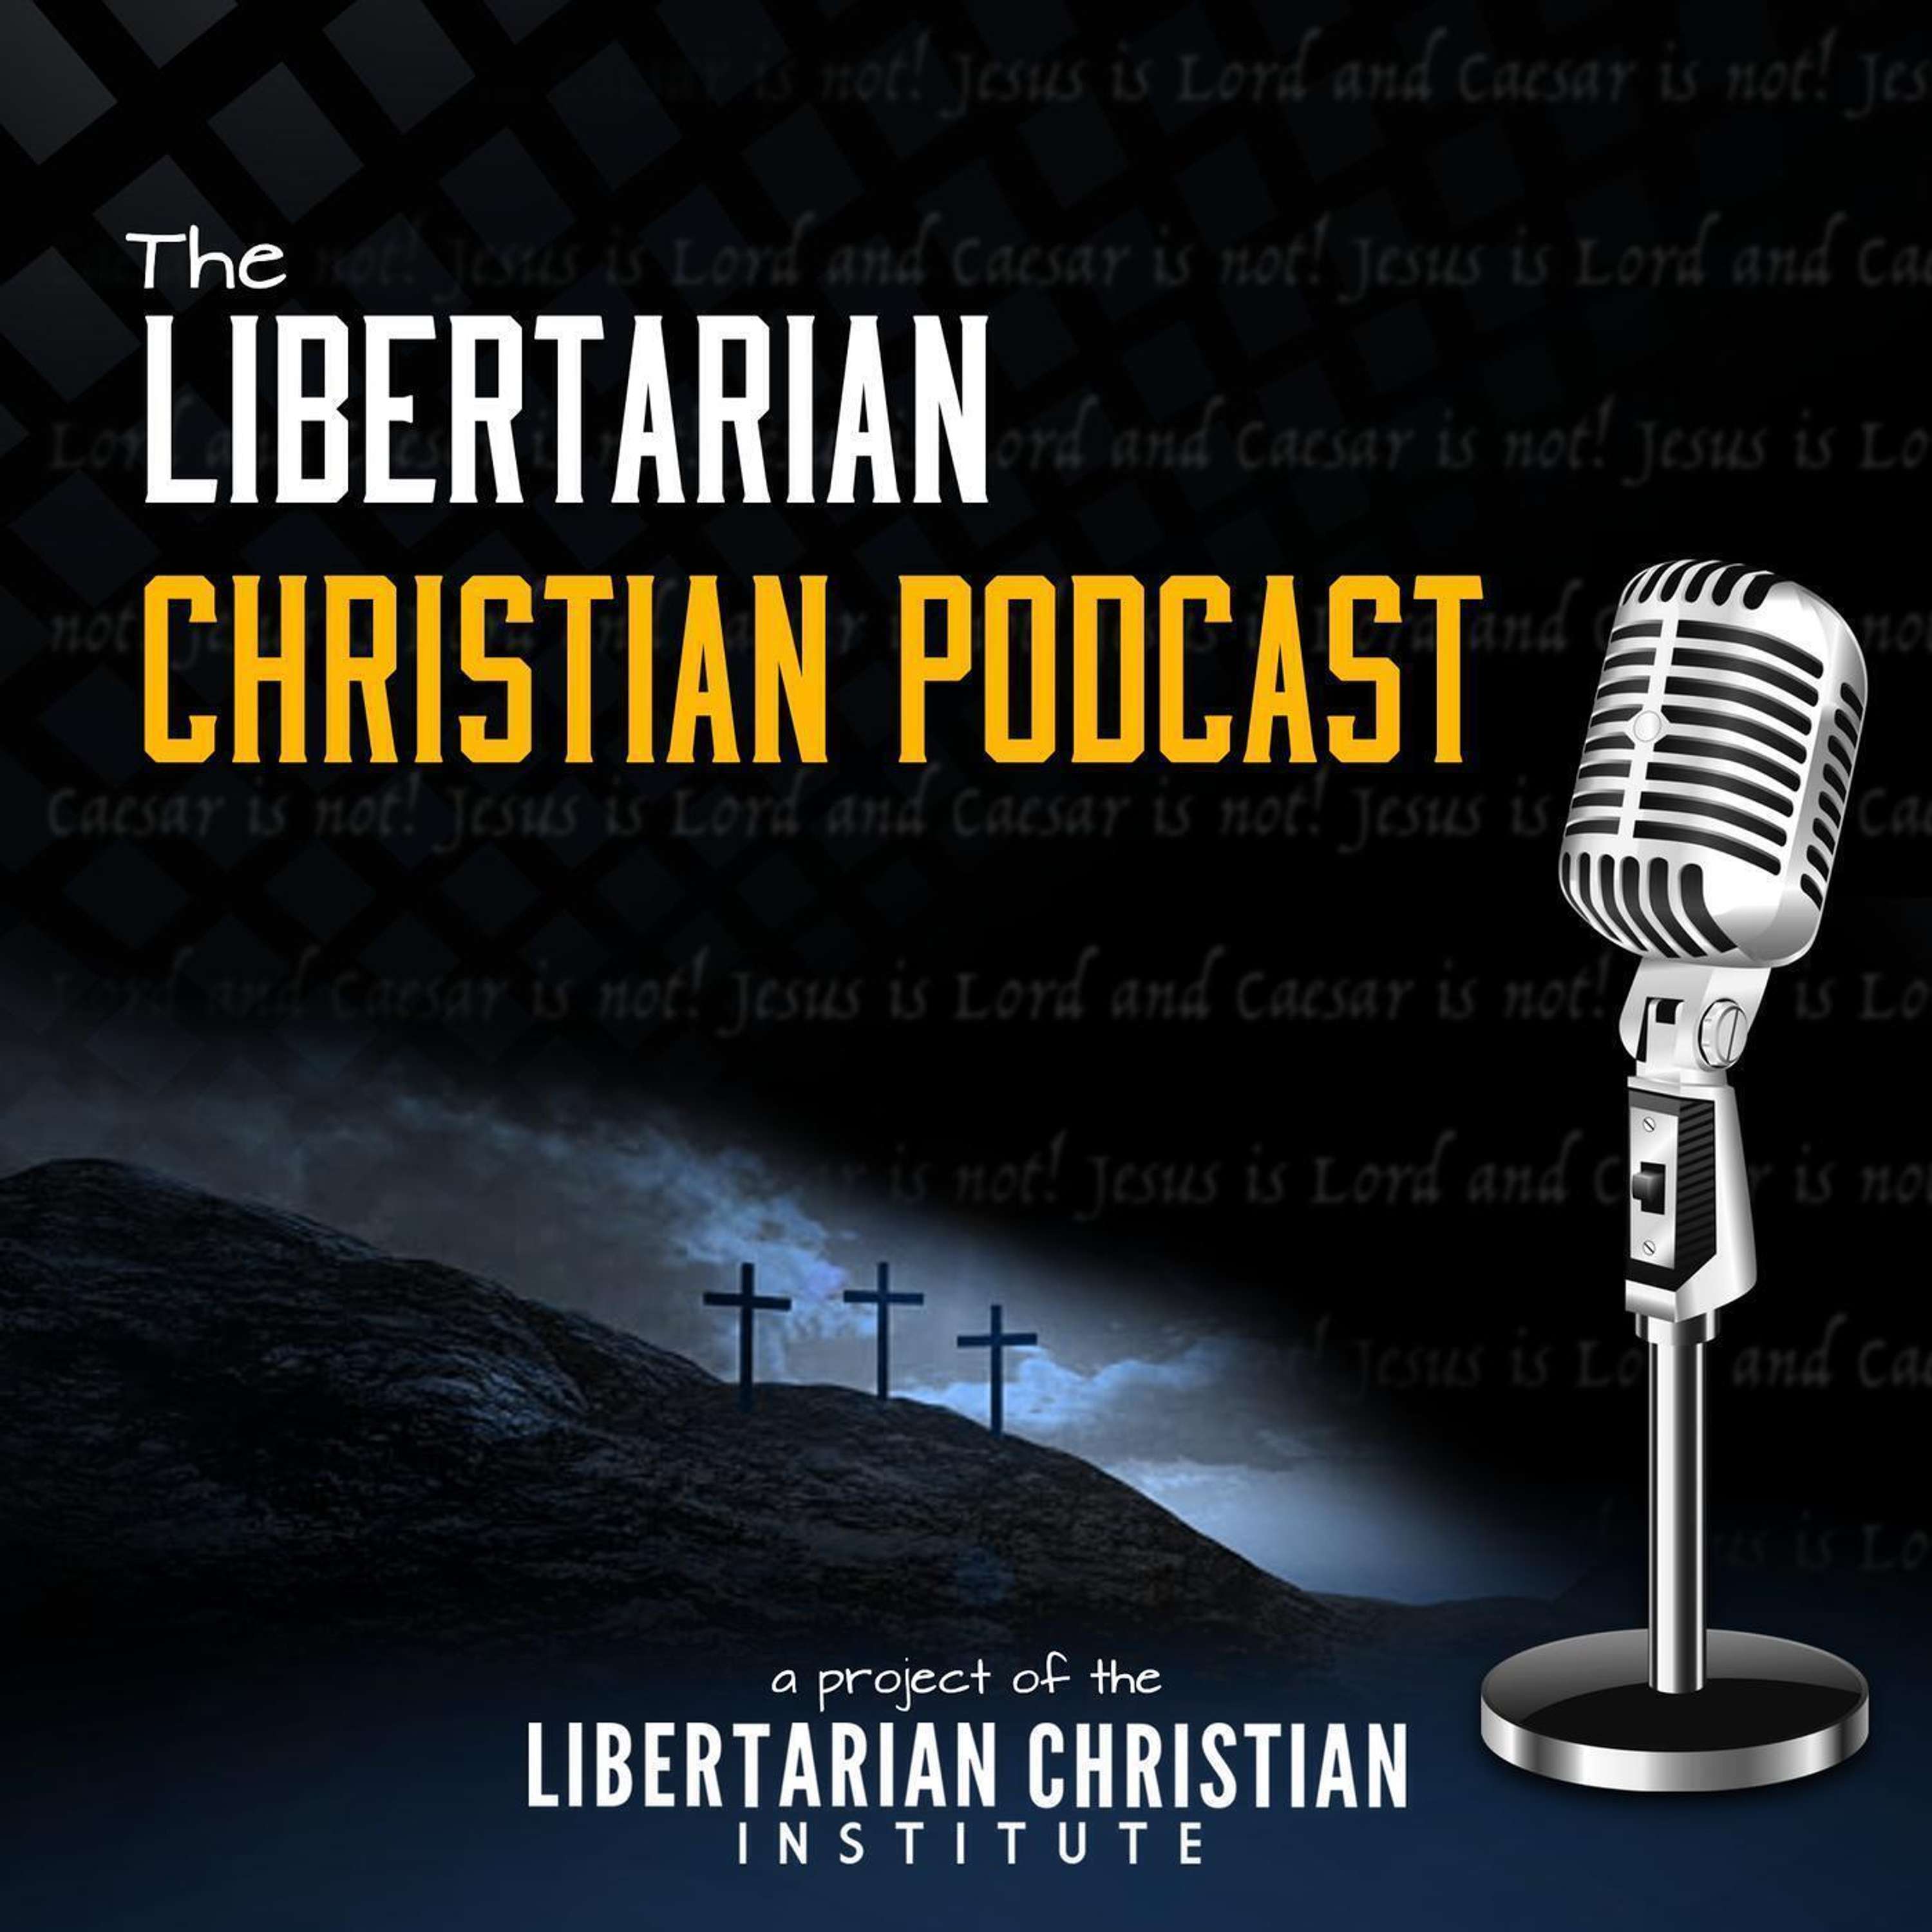 Ep 140: Should Christians Care About Competition? with Dr. Art Carden